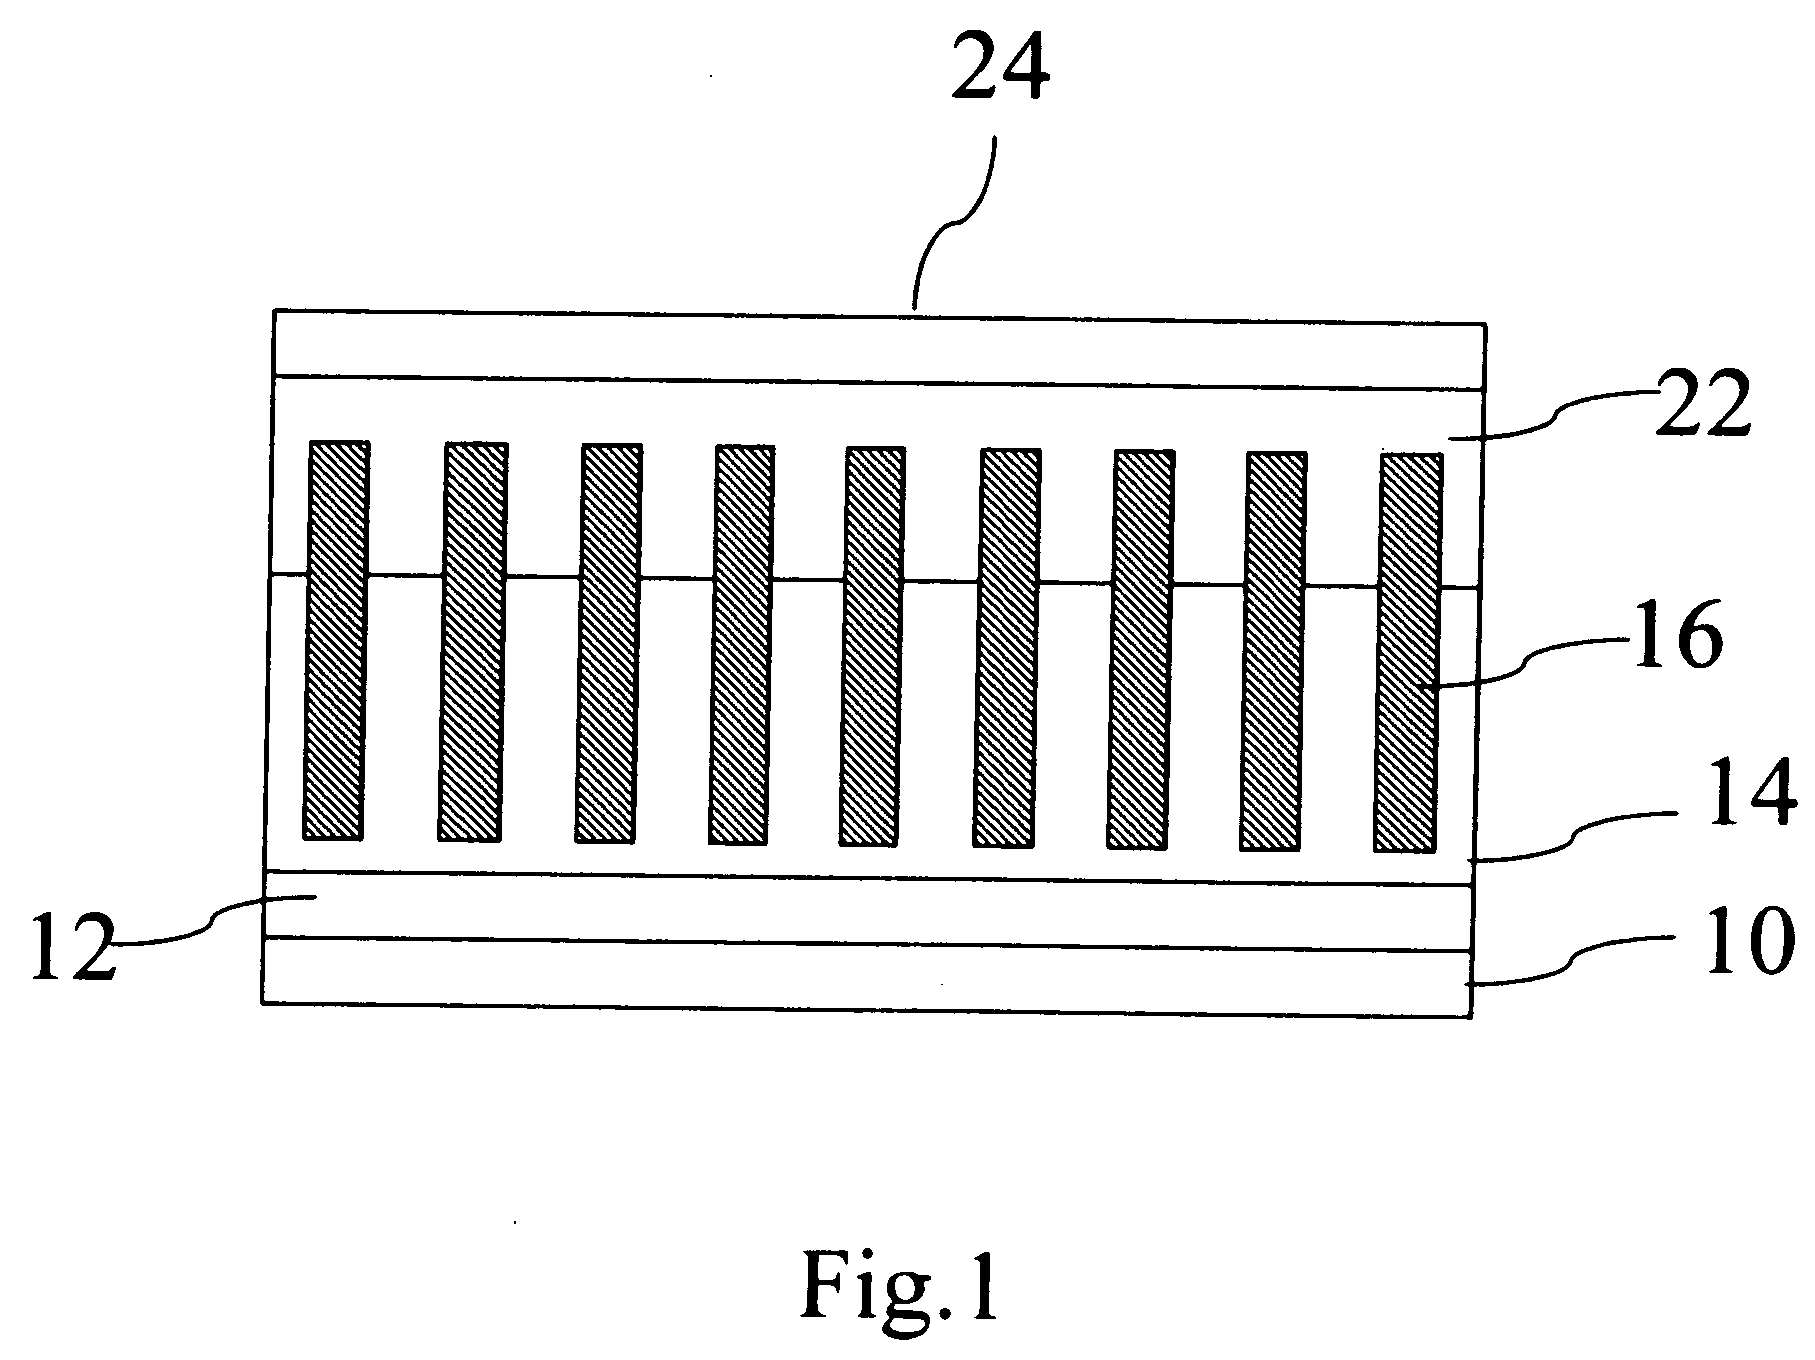 Mixed-typed heterojunction thin-film solar cell structure and method for fabricating the same